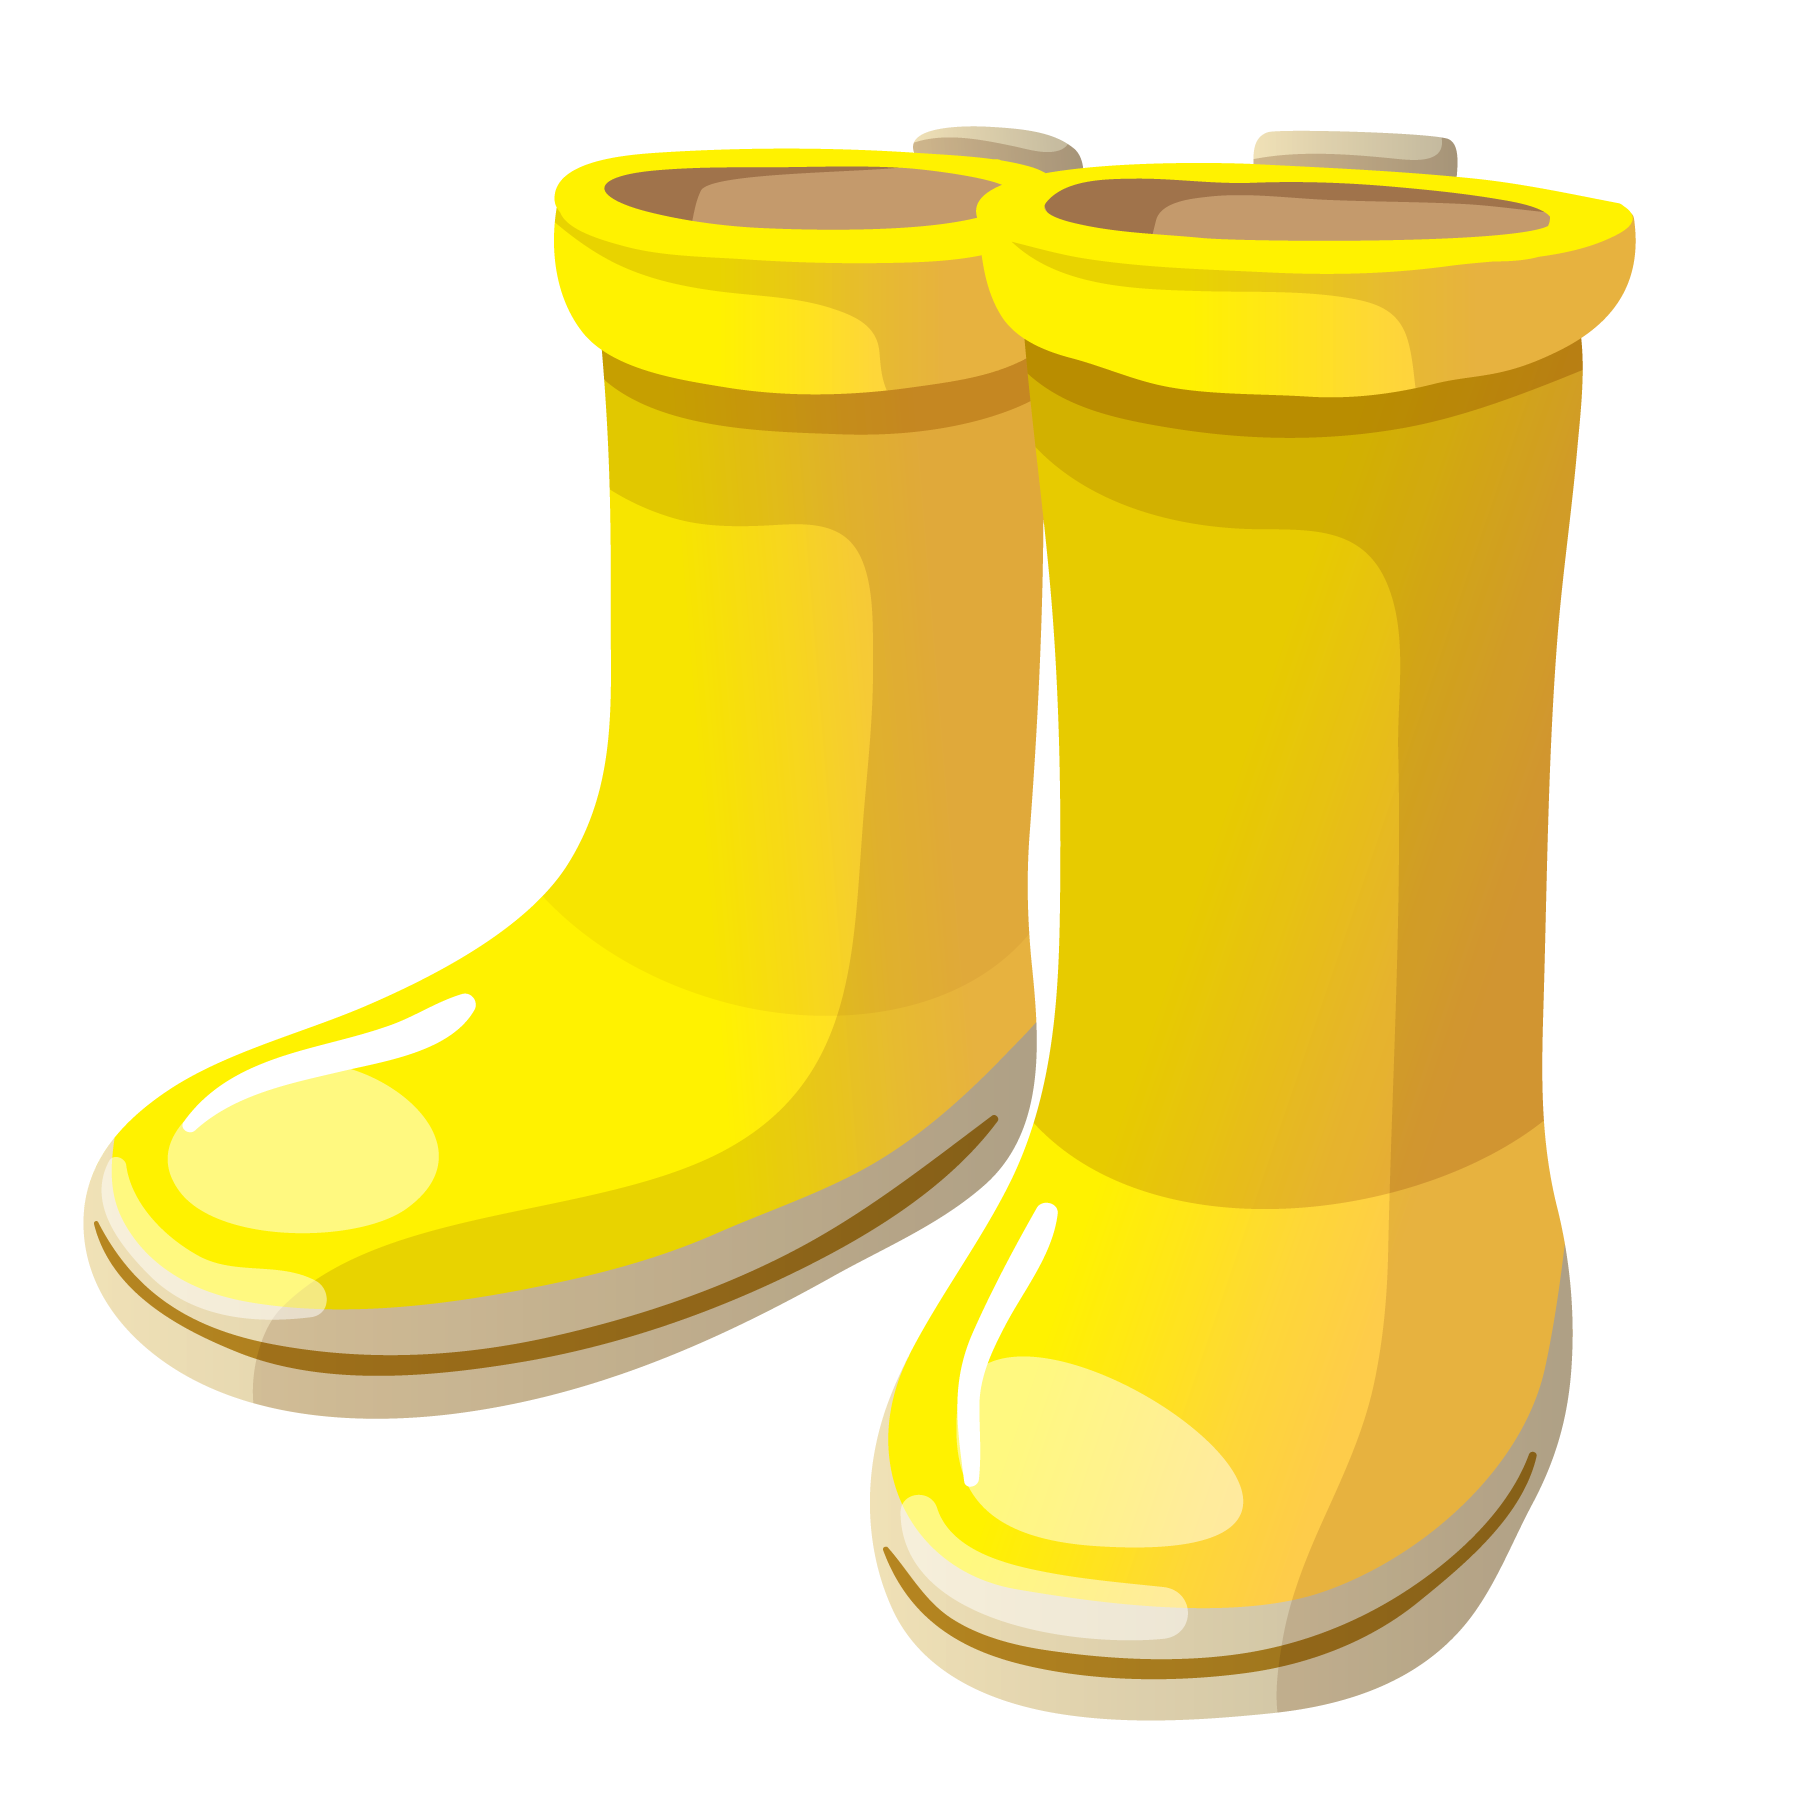 Boots clipart yellow boot. 